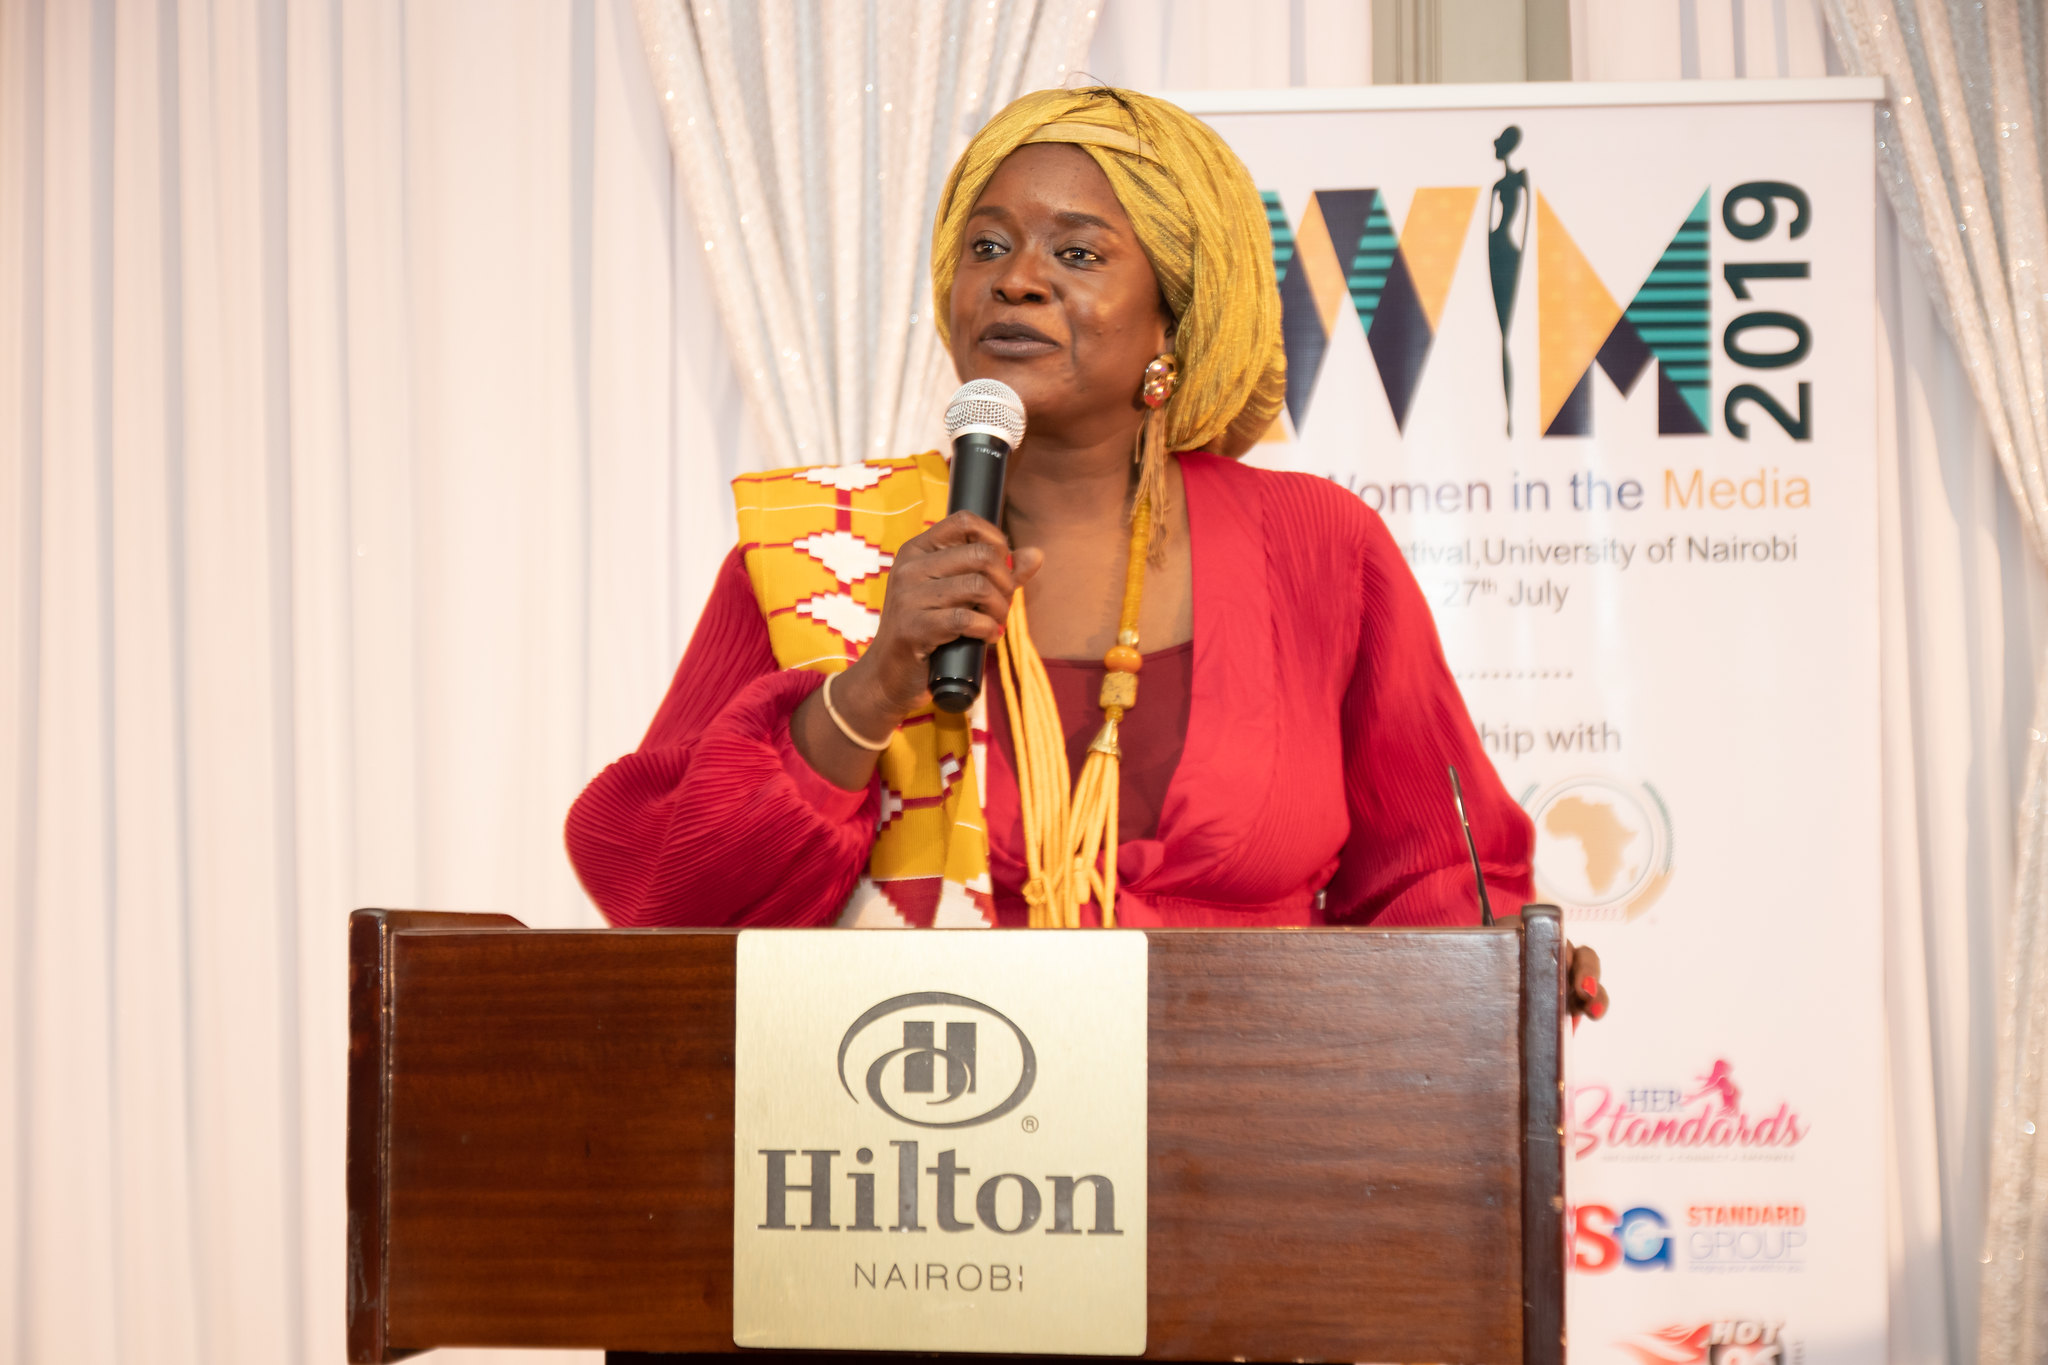  The AWIM Awards & Agenda 2063: A Reflection of the New Africa